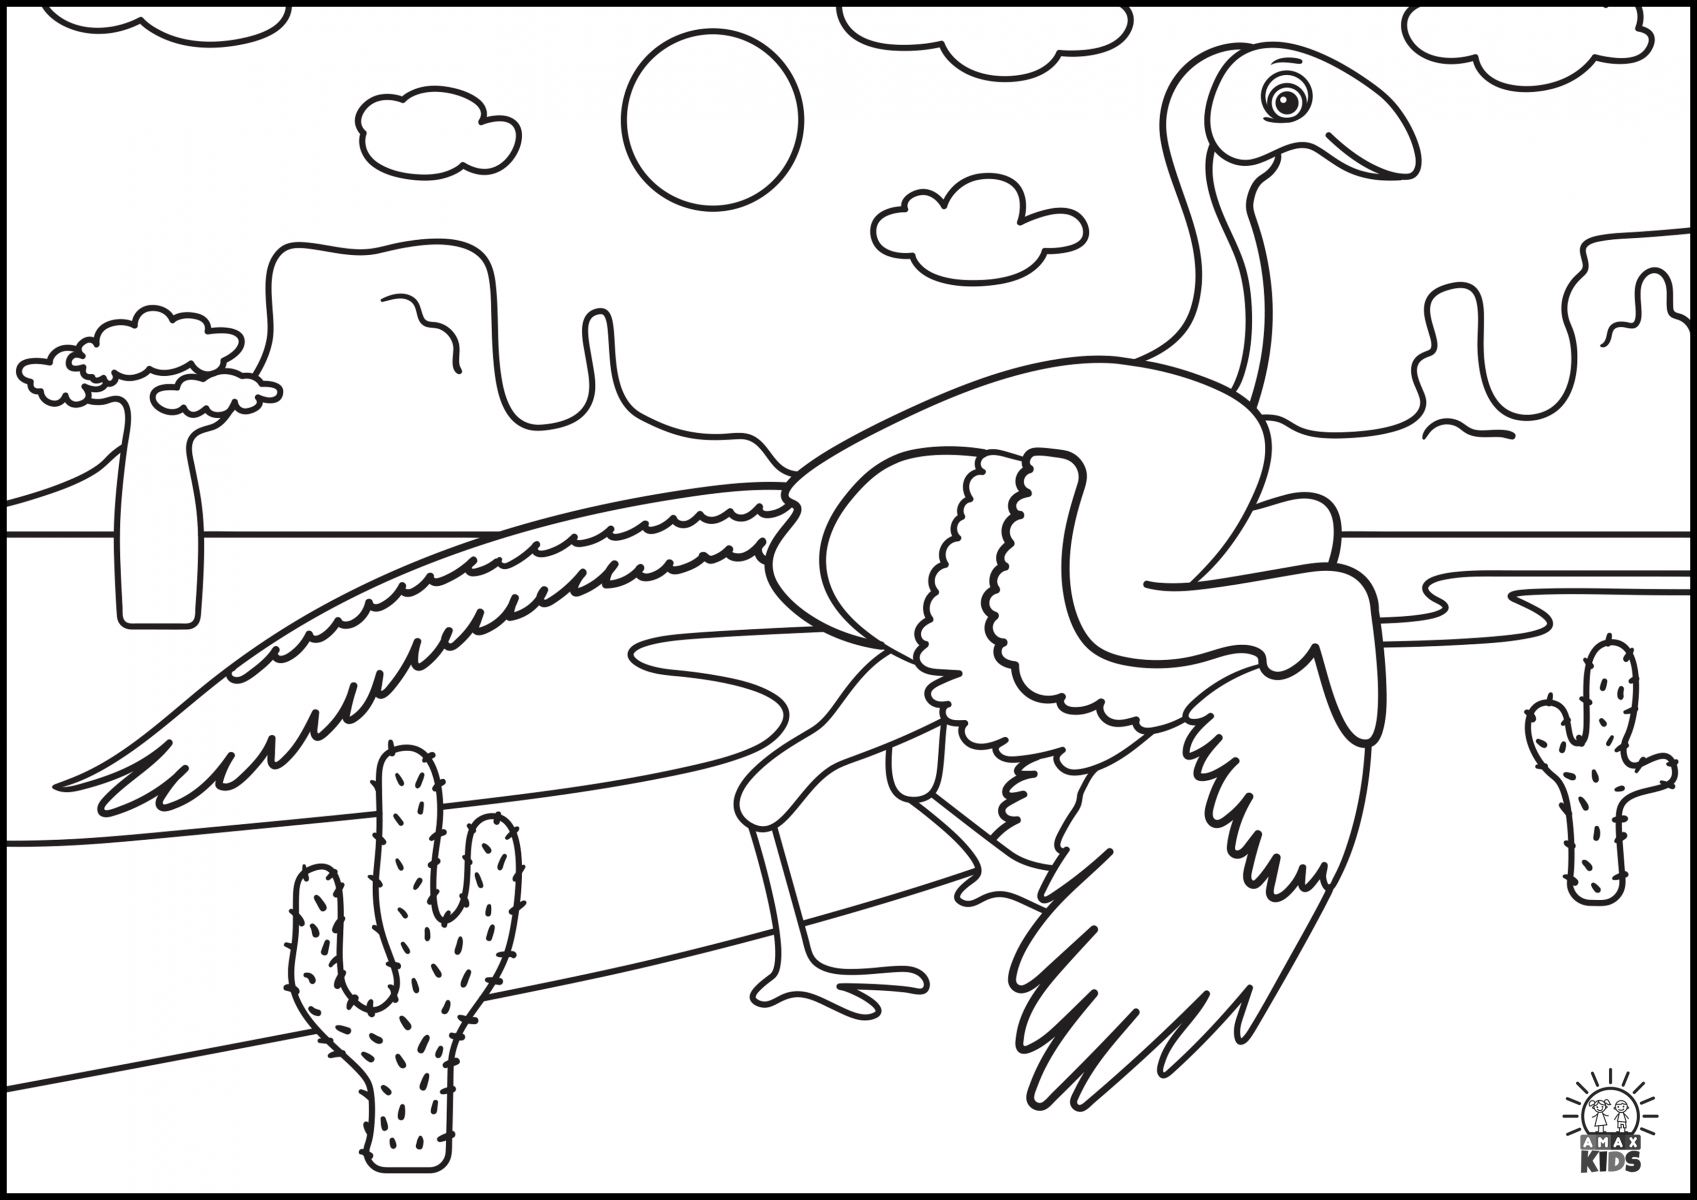 Download Coloring pages for kids with dinosaurs | Amax Kids